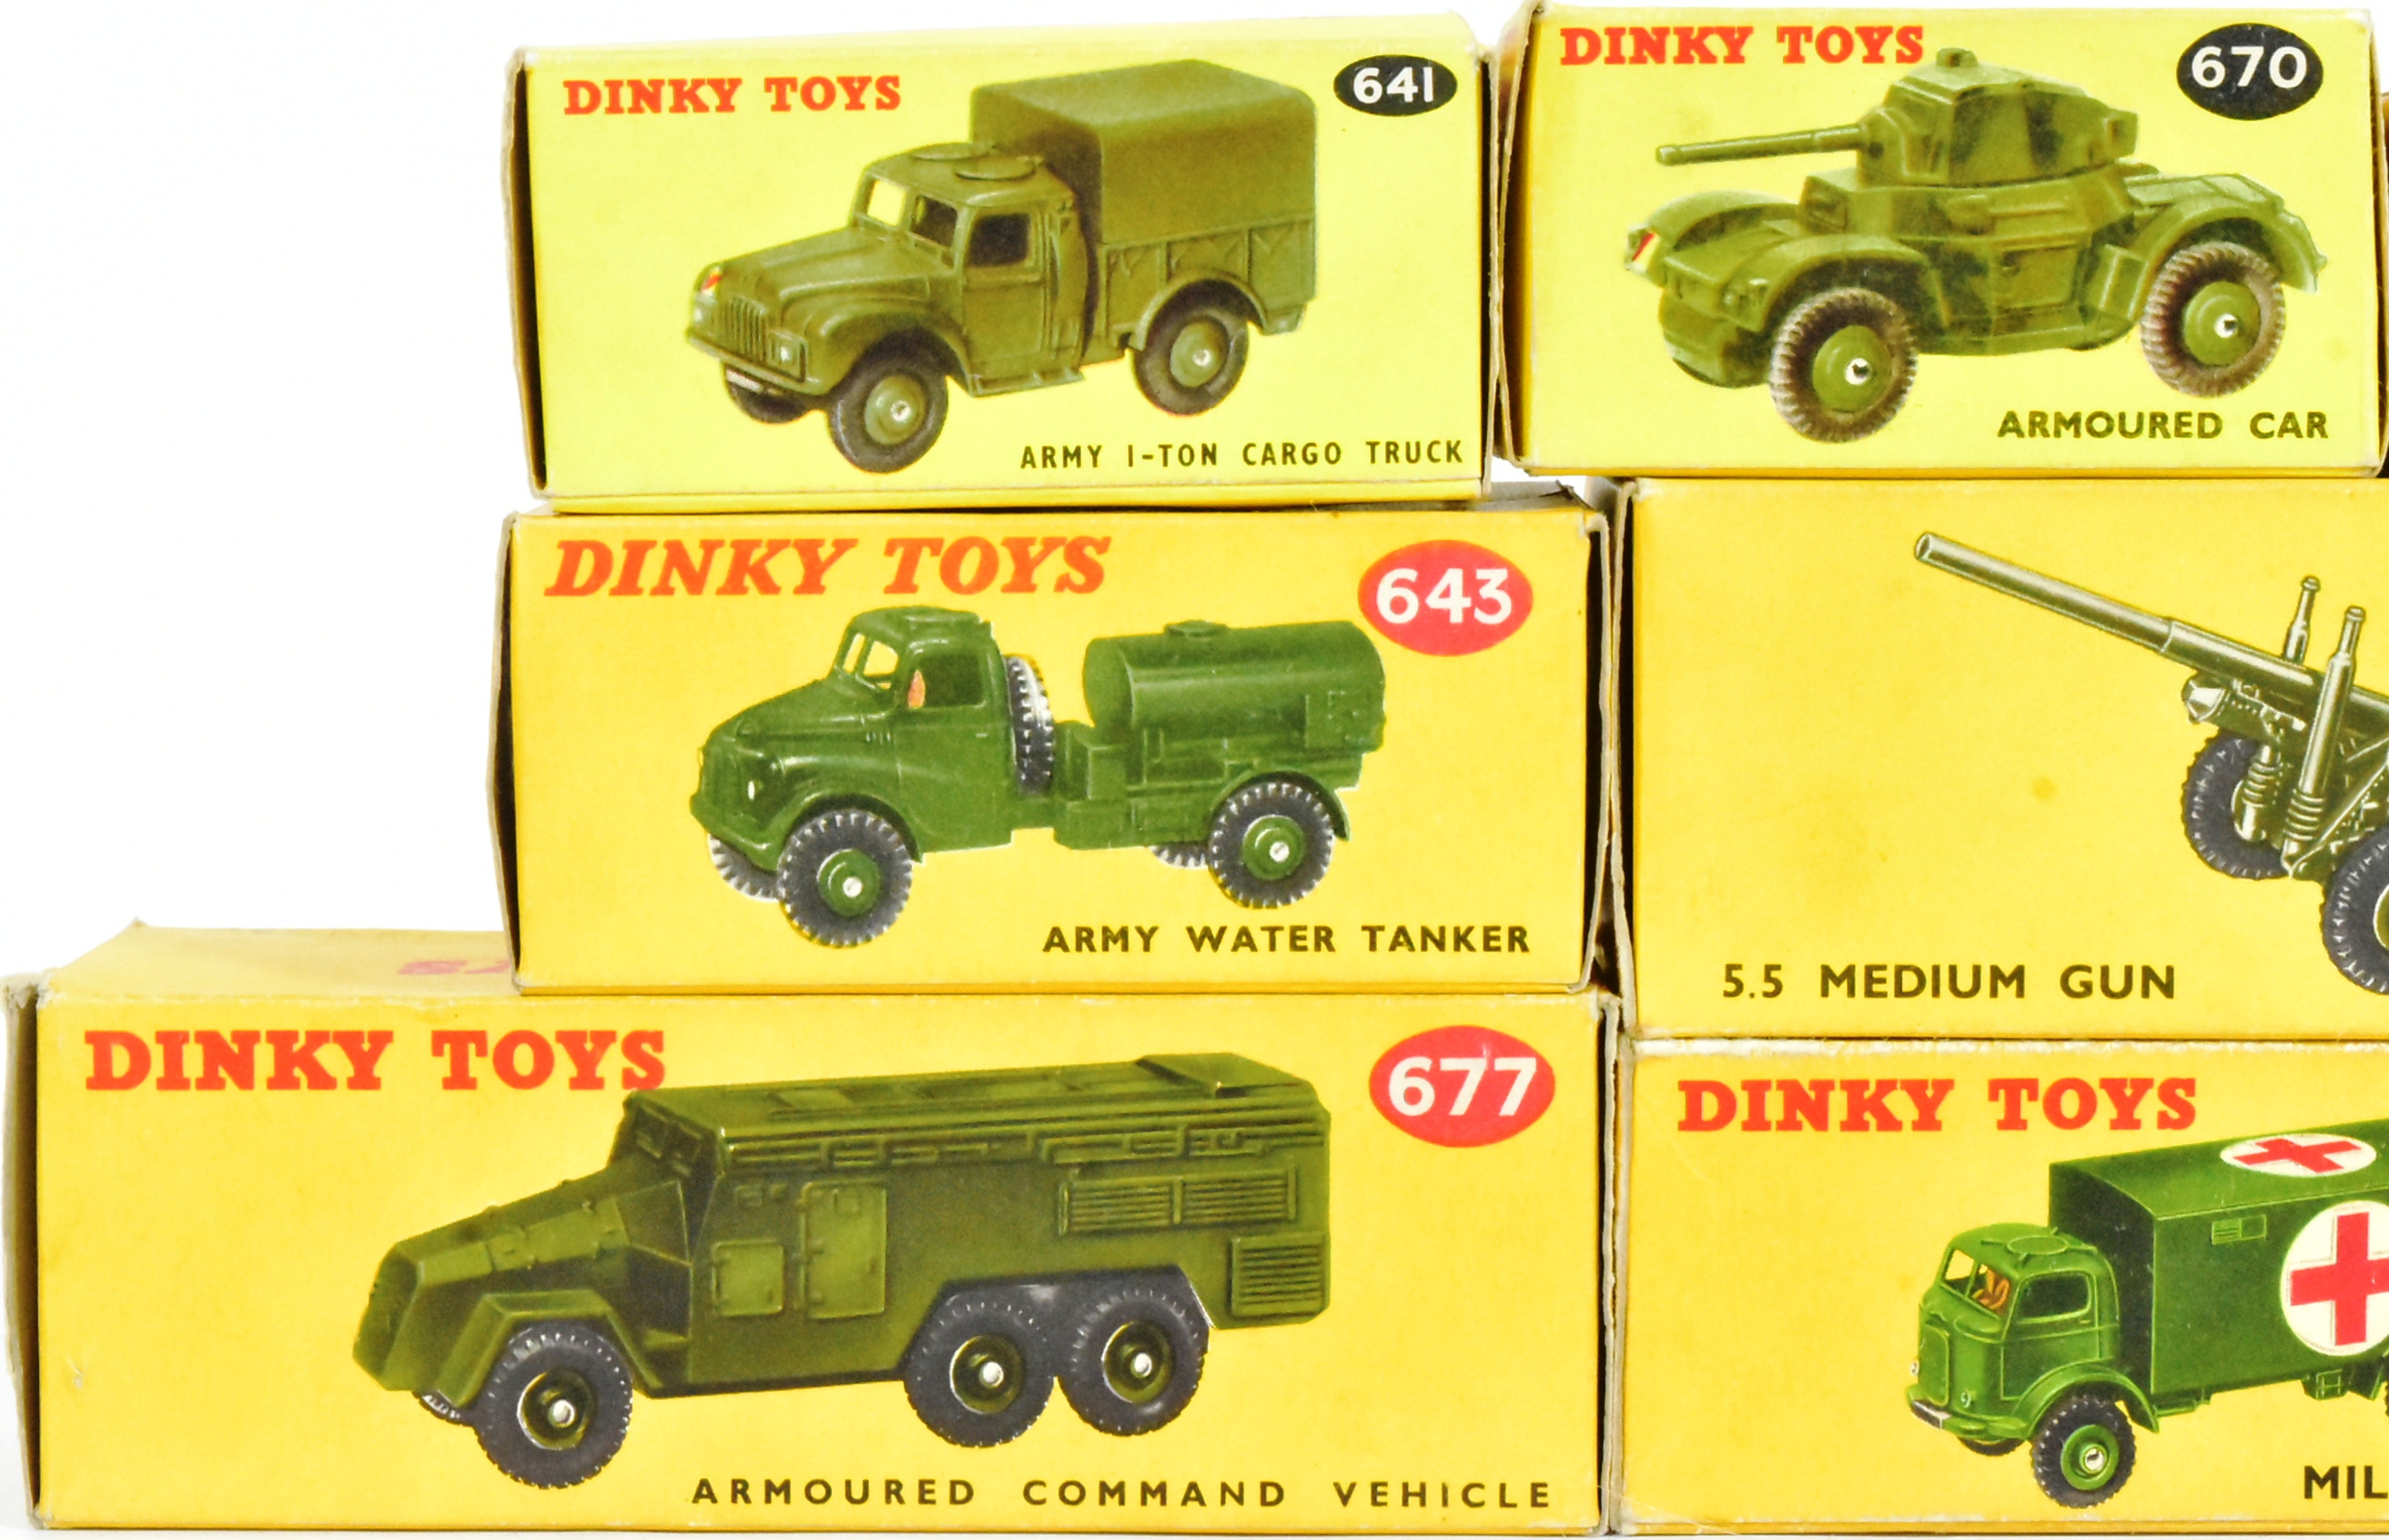 DIECAST - COLLECTION OF DINKY TOYS DIECAST MILITARY MODELS - Image 2 of 5